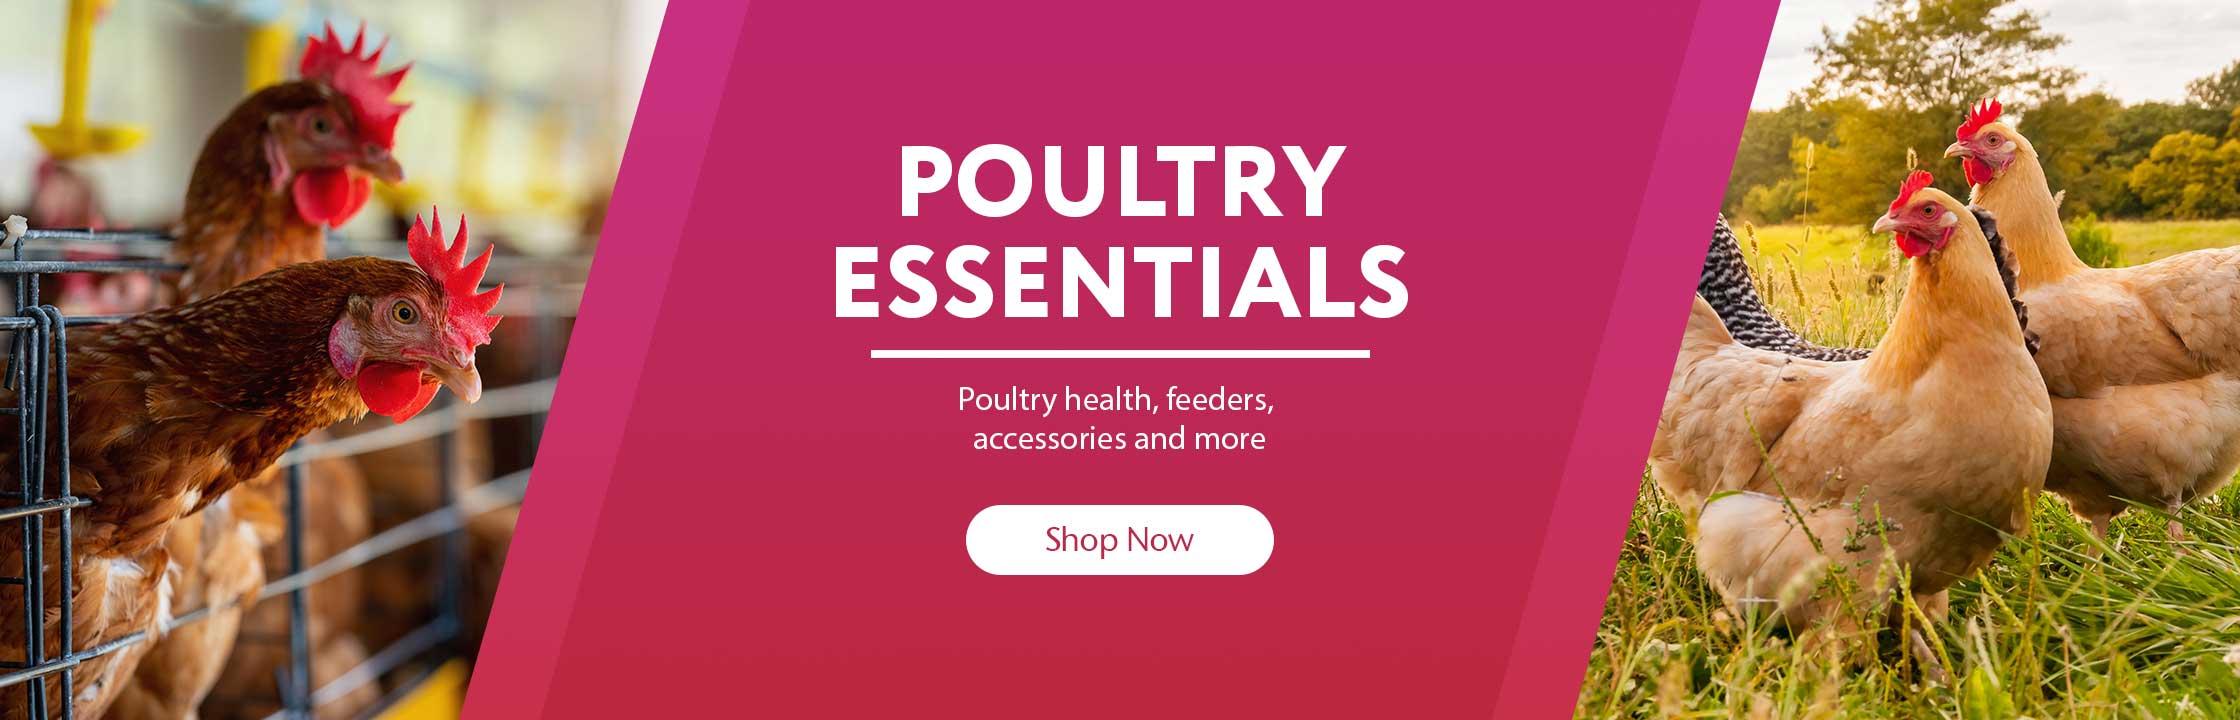 Poultry Essentials